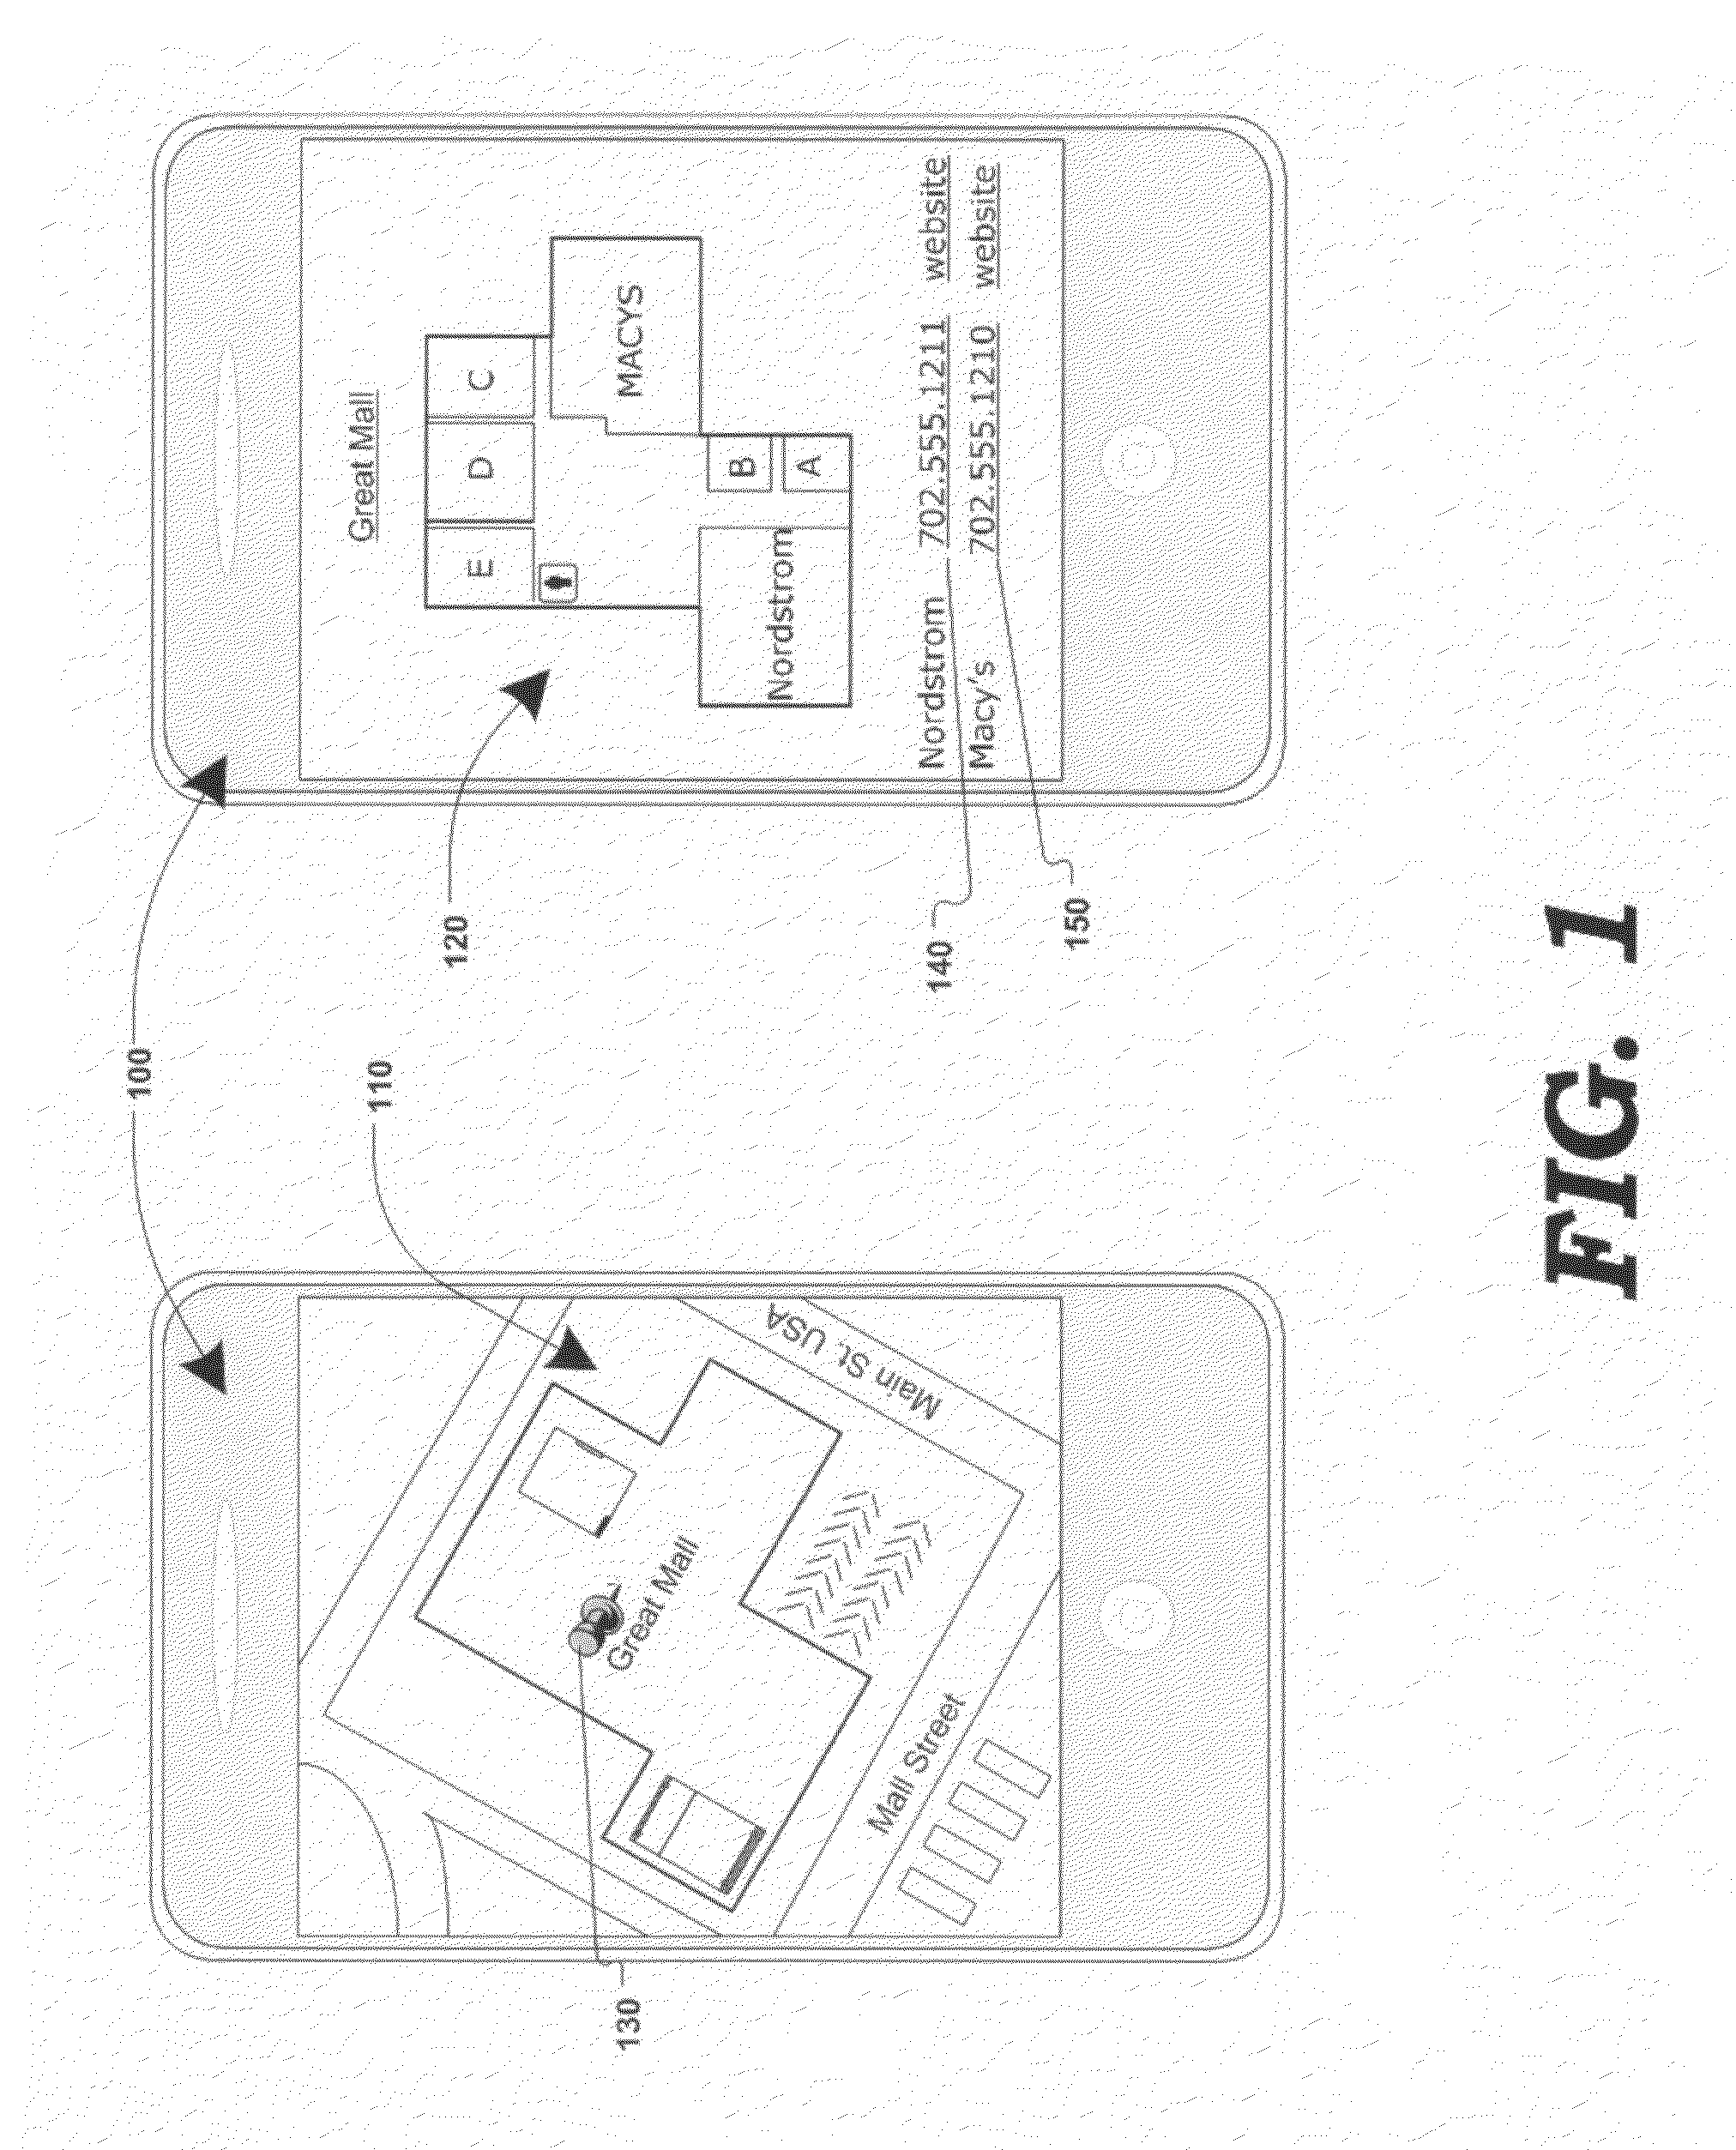 Displaying content associated with electronic mapping systems